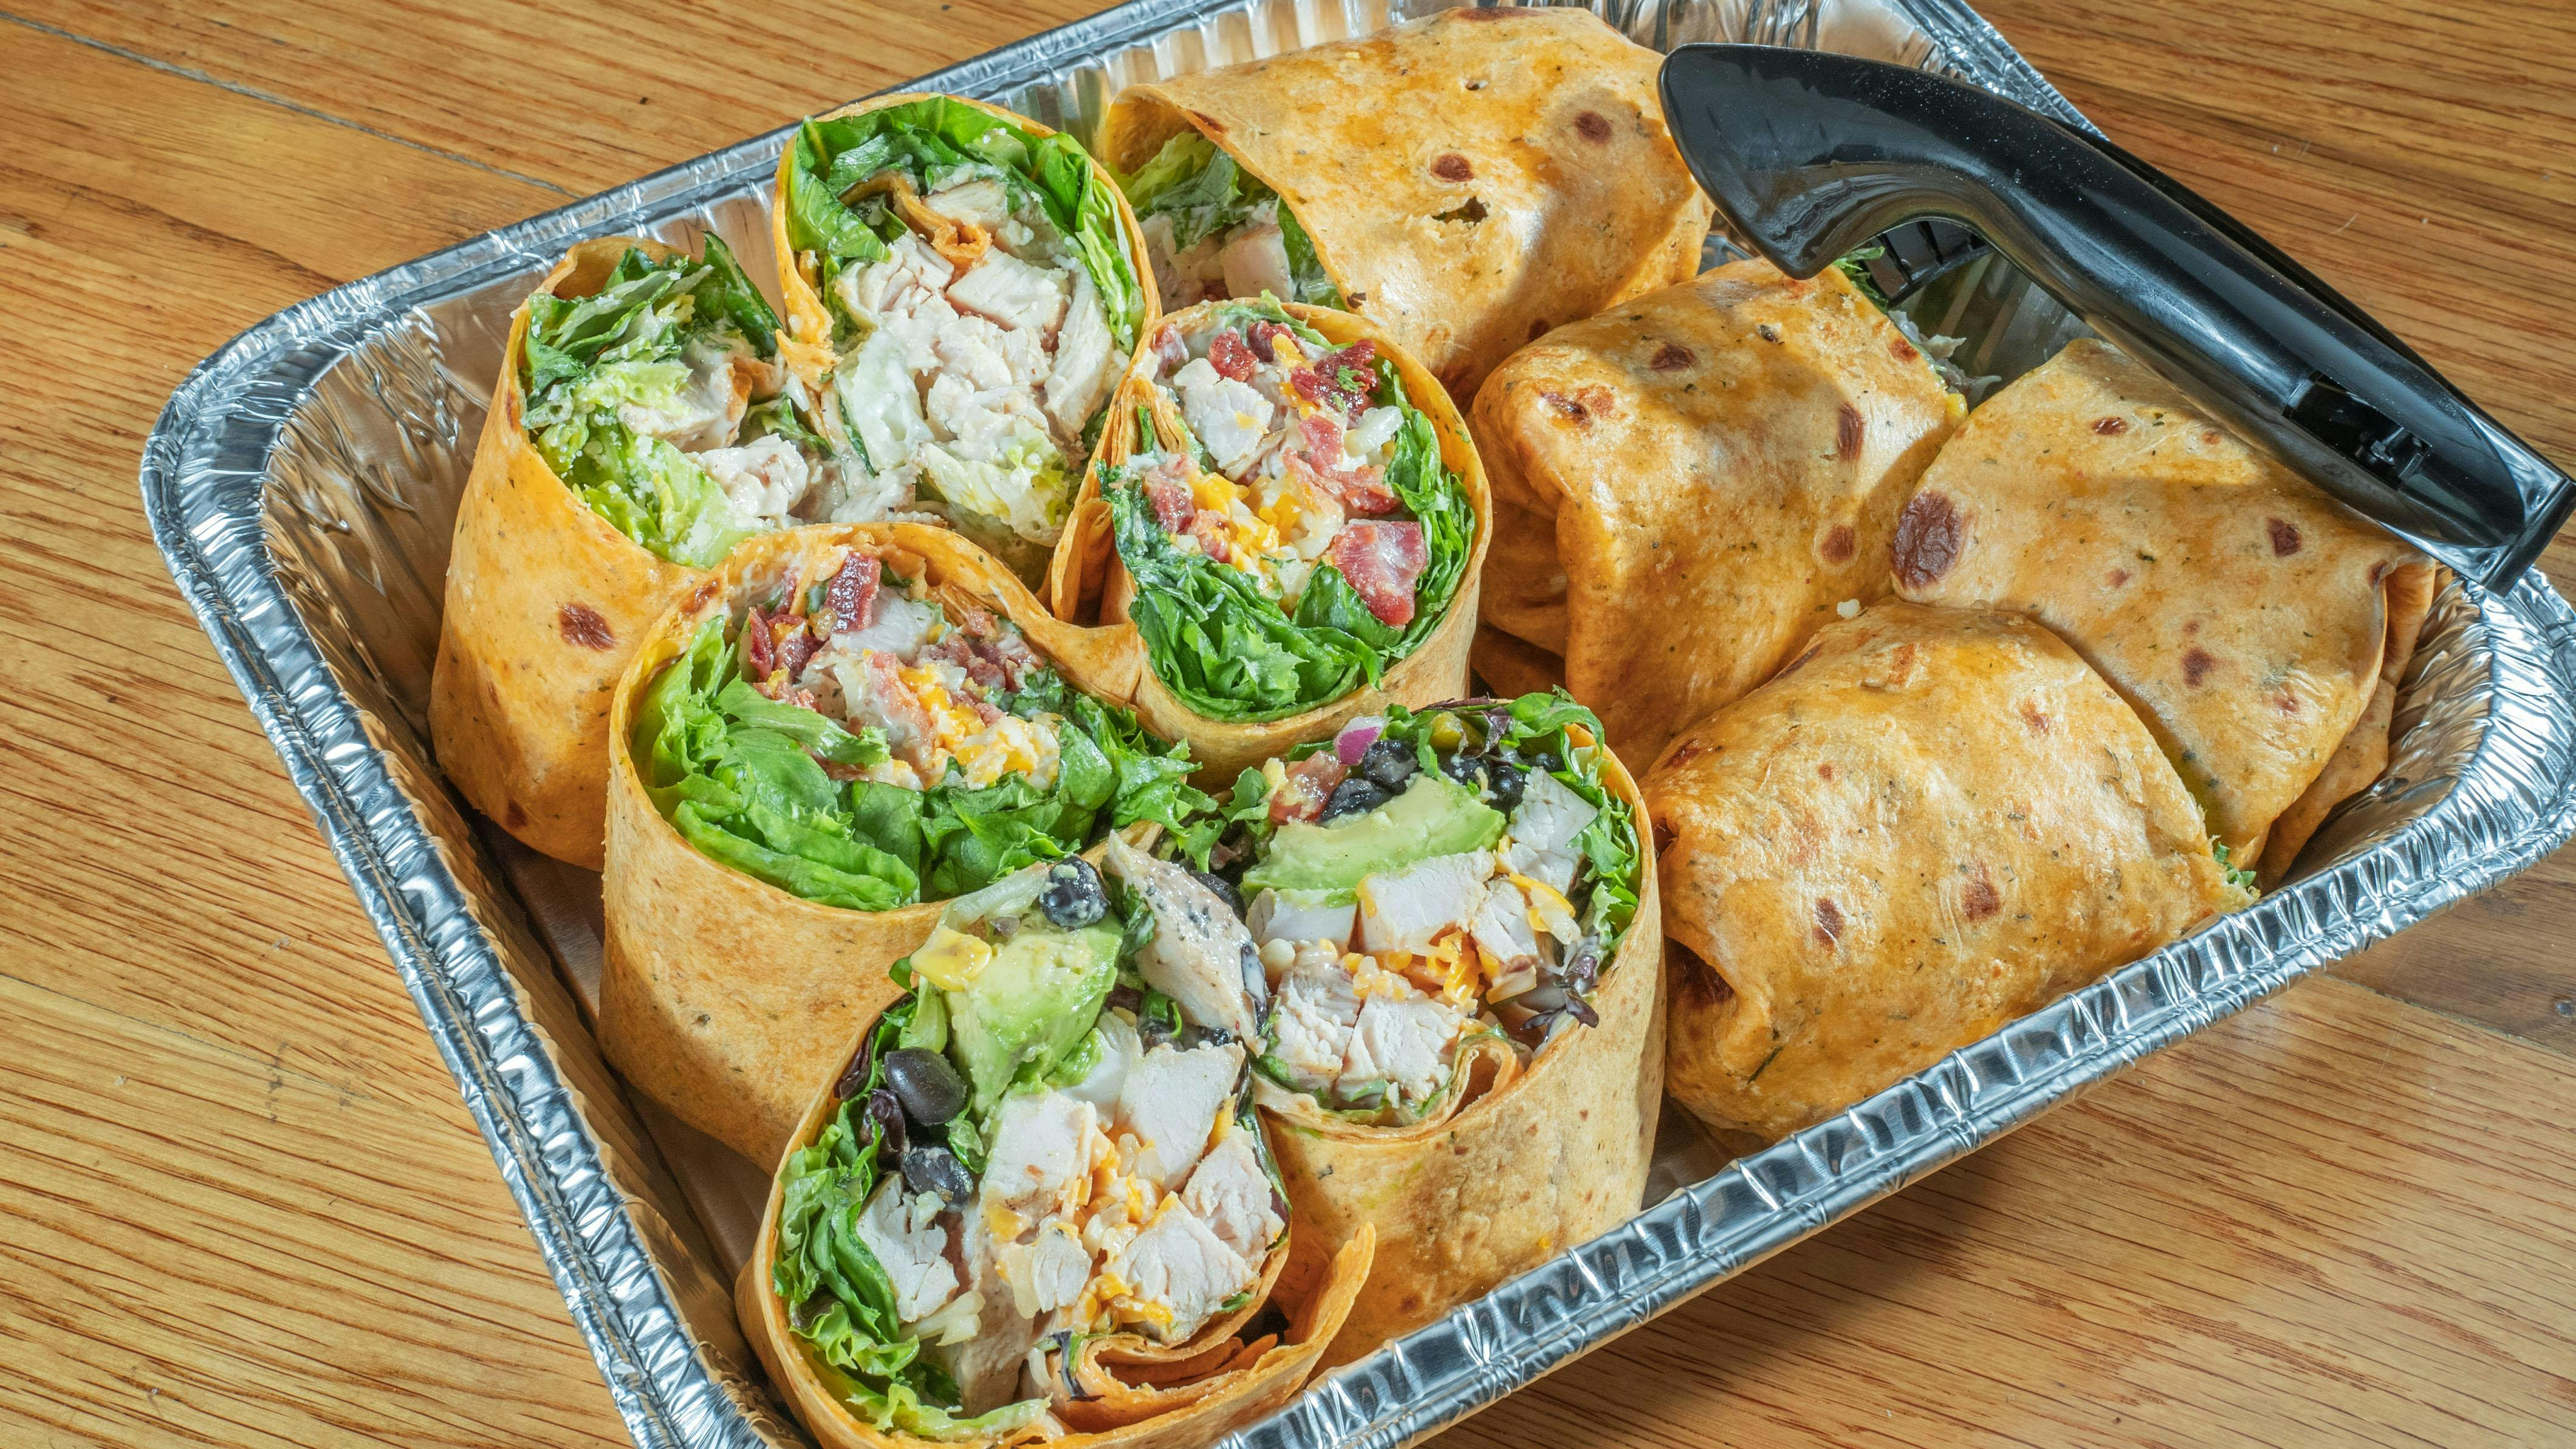 Chick Wrap Half Tray from Happy Chicks - Research Blvd in Austin, TX